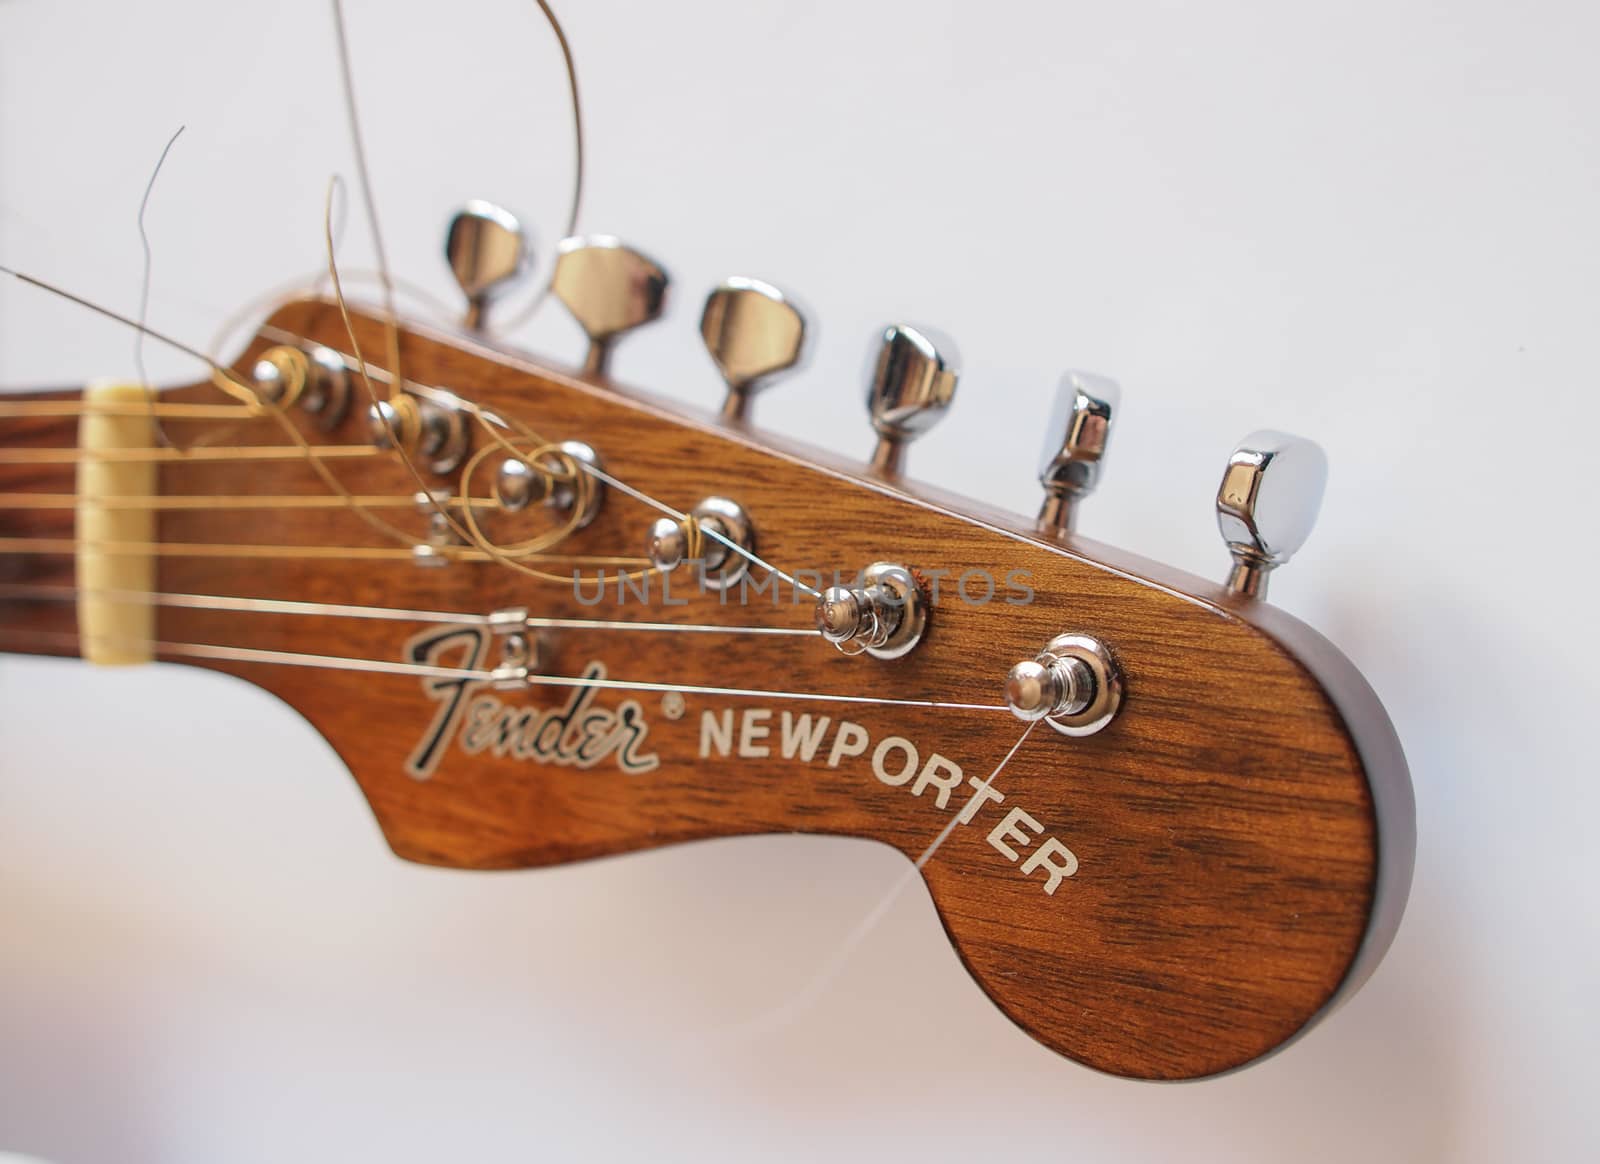 Fender guitar by paolo77